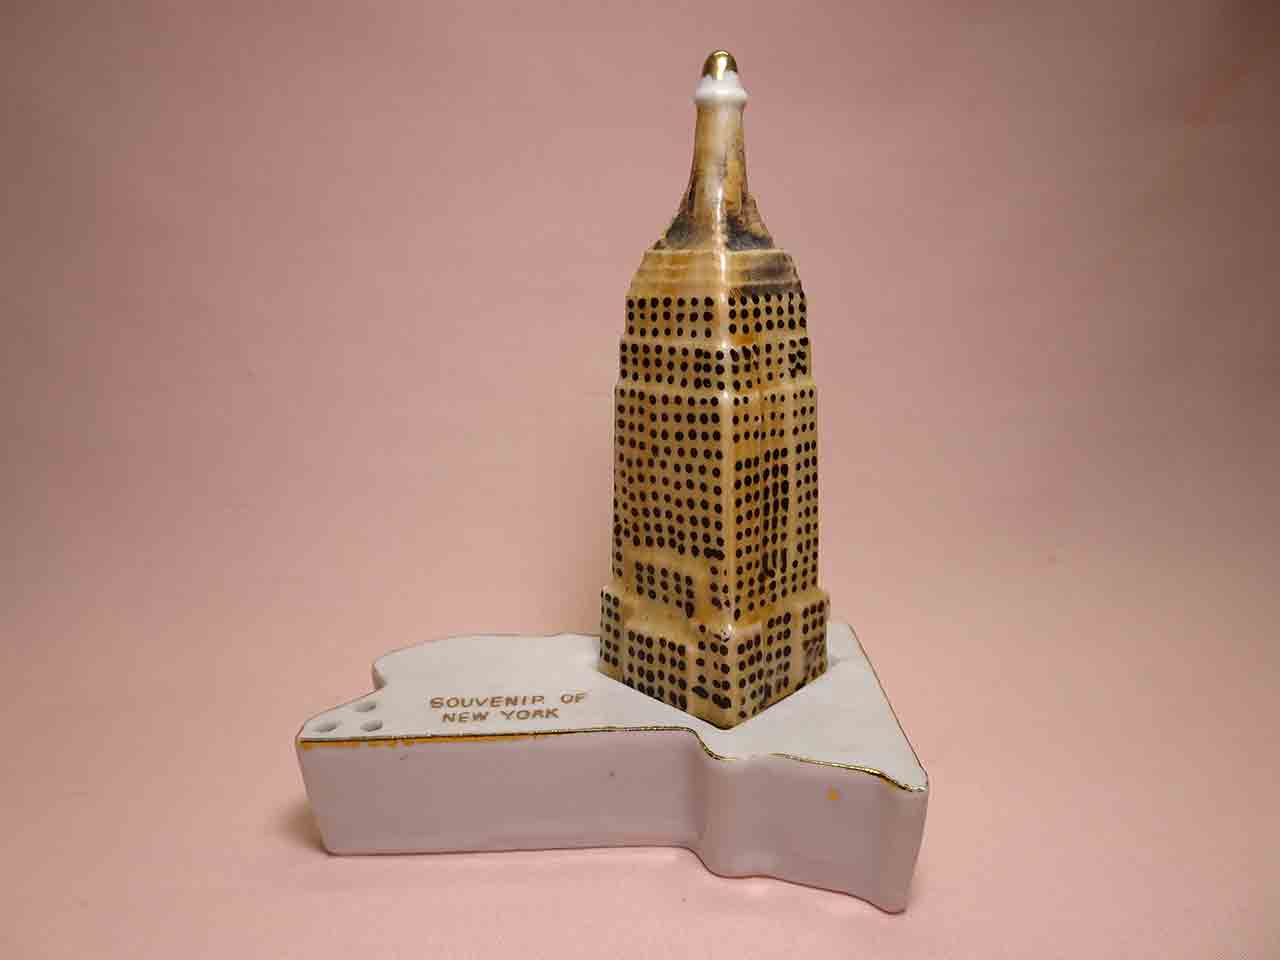 New York with Empire State Building salt and pepper shakers